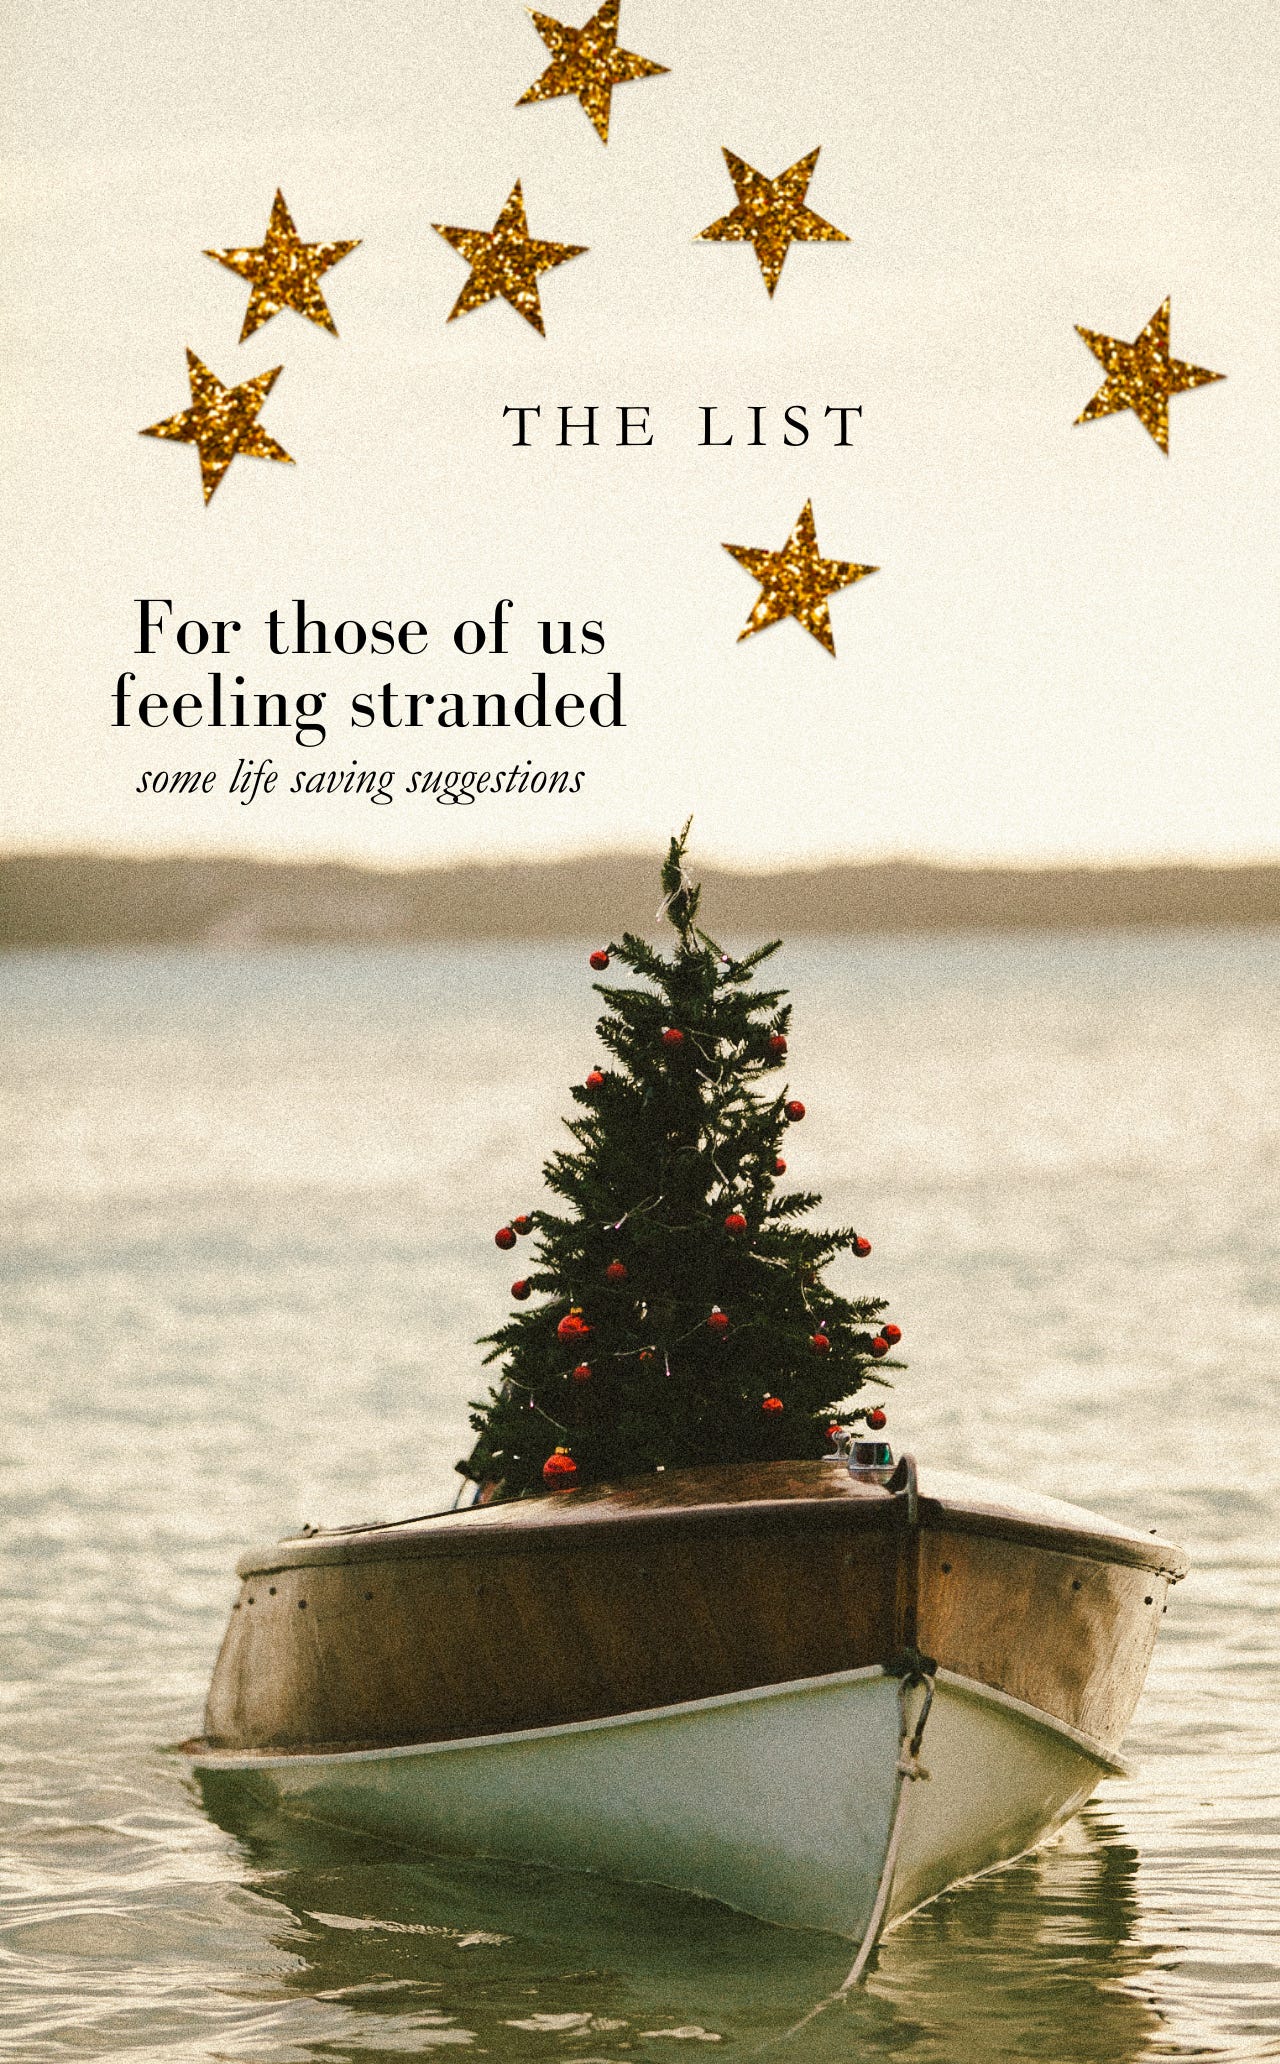 THE LIST - for those of us feeling stranded - some life saving suggestions